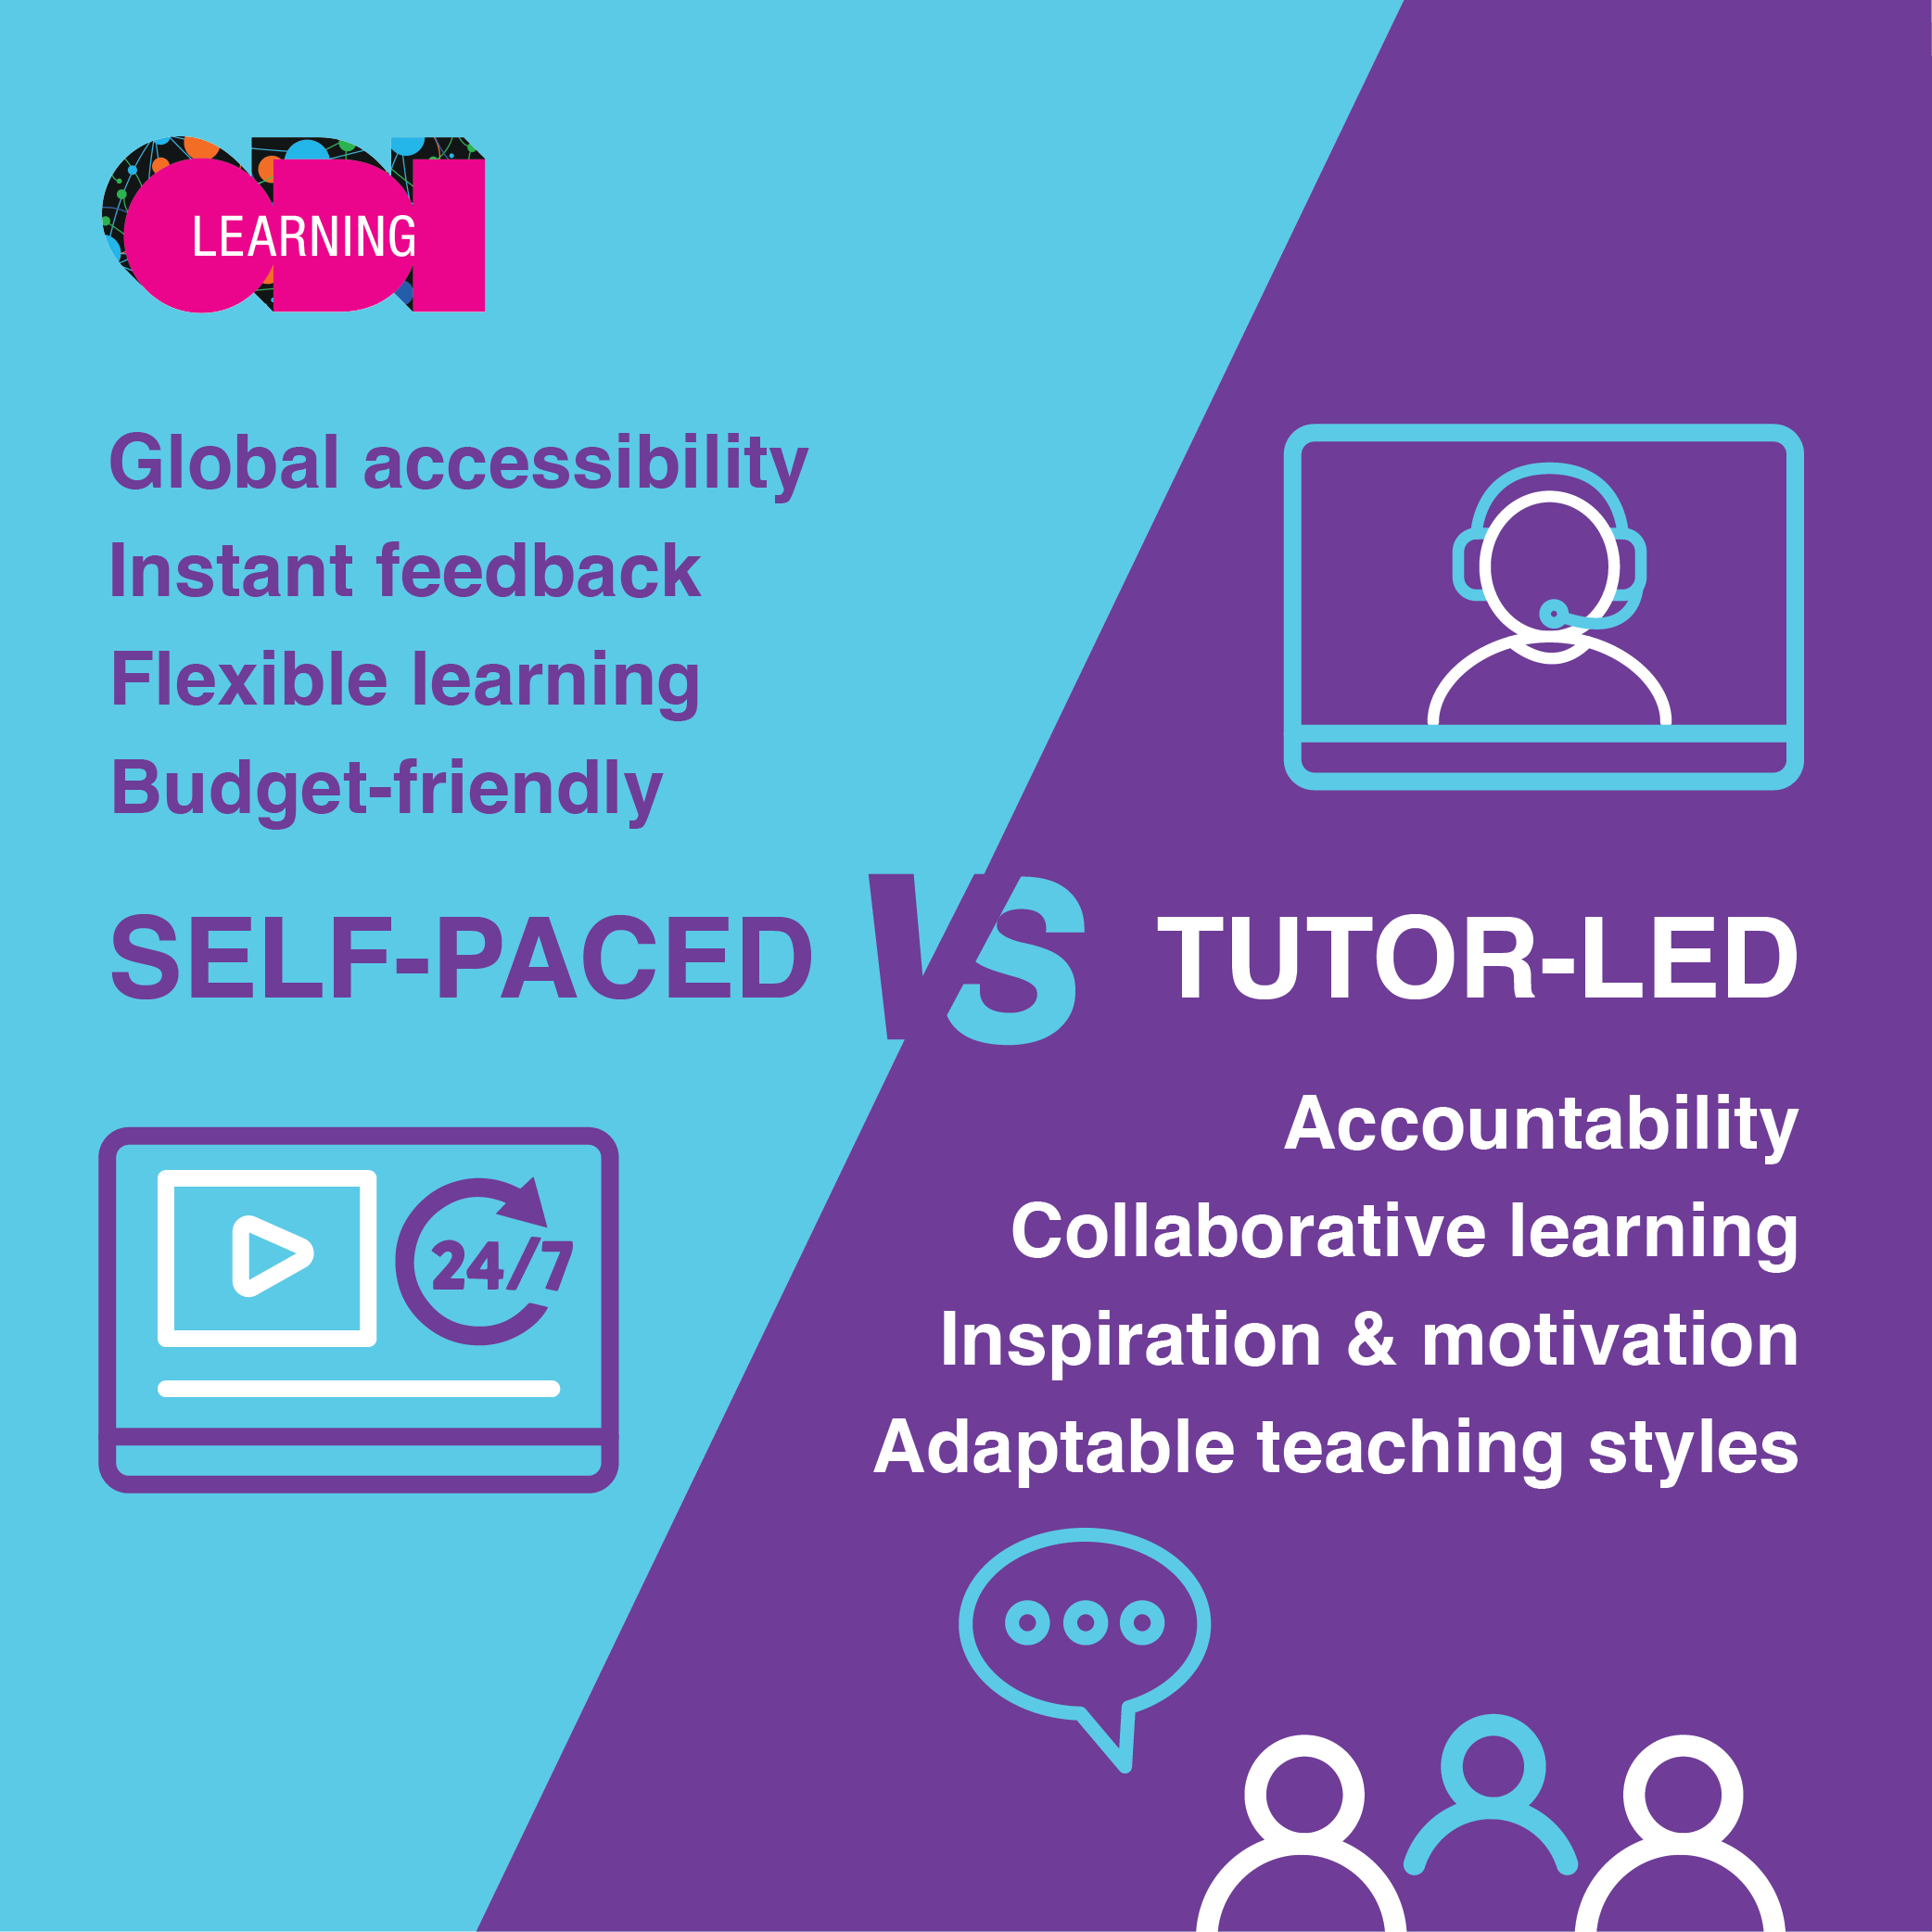 Self-paced vs tutor-led learning at the ODI